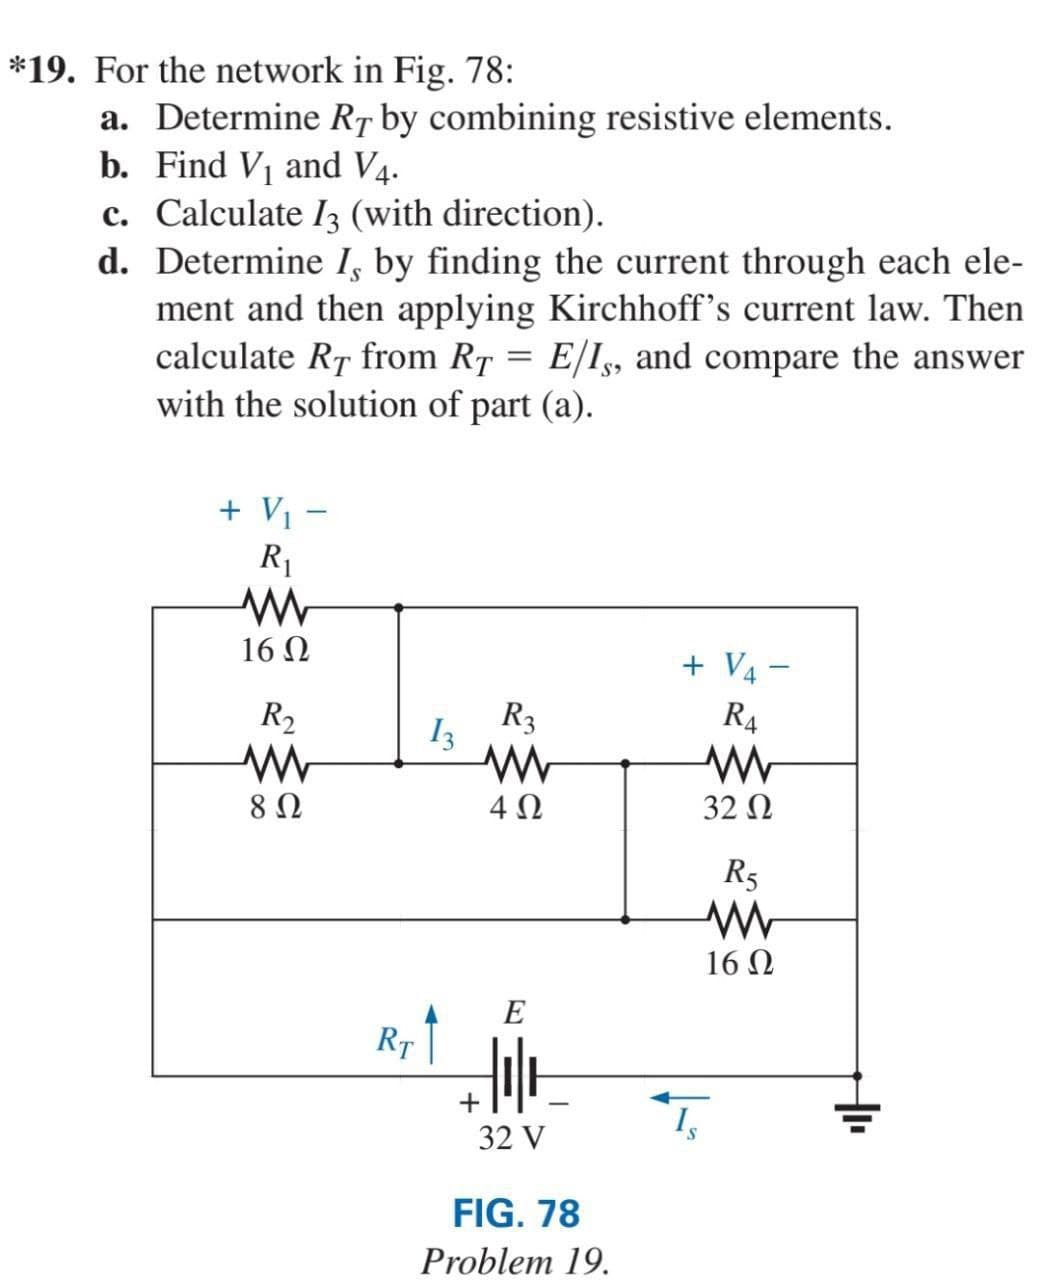 *19. For the network in Fig. 78:
a. Determine RT by combining resistive elements.
b. Find V₁ and V4.
c. Calculate 3 (with direction).
d.
Determine I, by finding the current through each ele-
ment and then applying Kirchhoff's current law. Then
calculate RT from RT = E/I,, and compare the answer
with the solution of part (a).
+ V₁ -
R₁
www
16 Ω
R₂
8 Ω
RT
13
R3
www
4 Ω
E
Hot
32 V
+
FIG. 78
Problem 19.
+ V4-
R4
www
32 Ω
T₂
R5
www
16 Ω